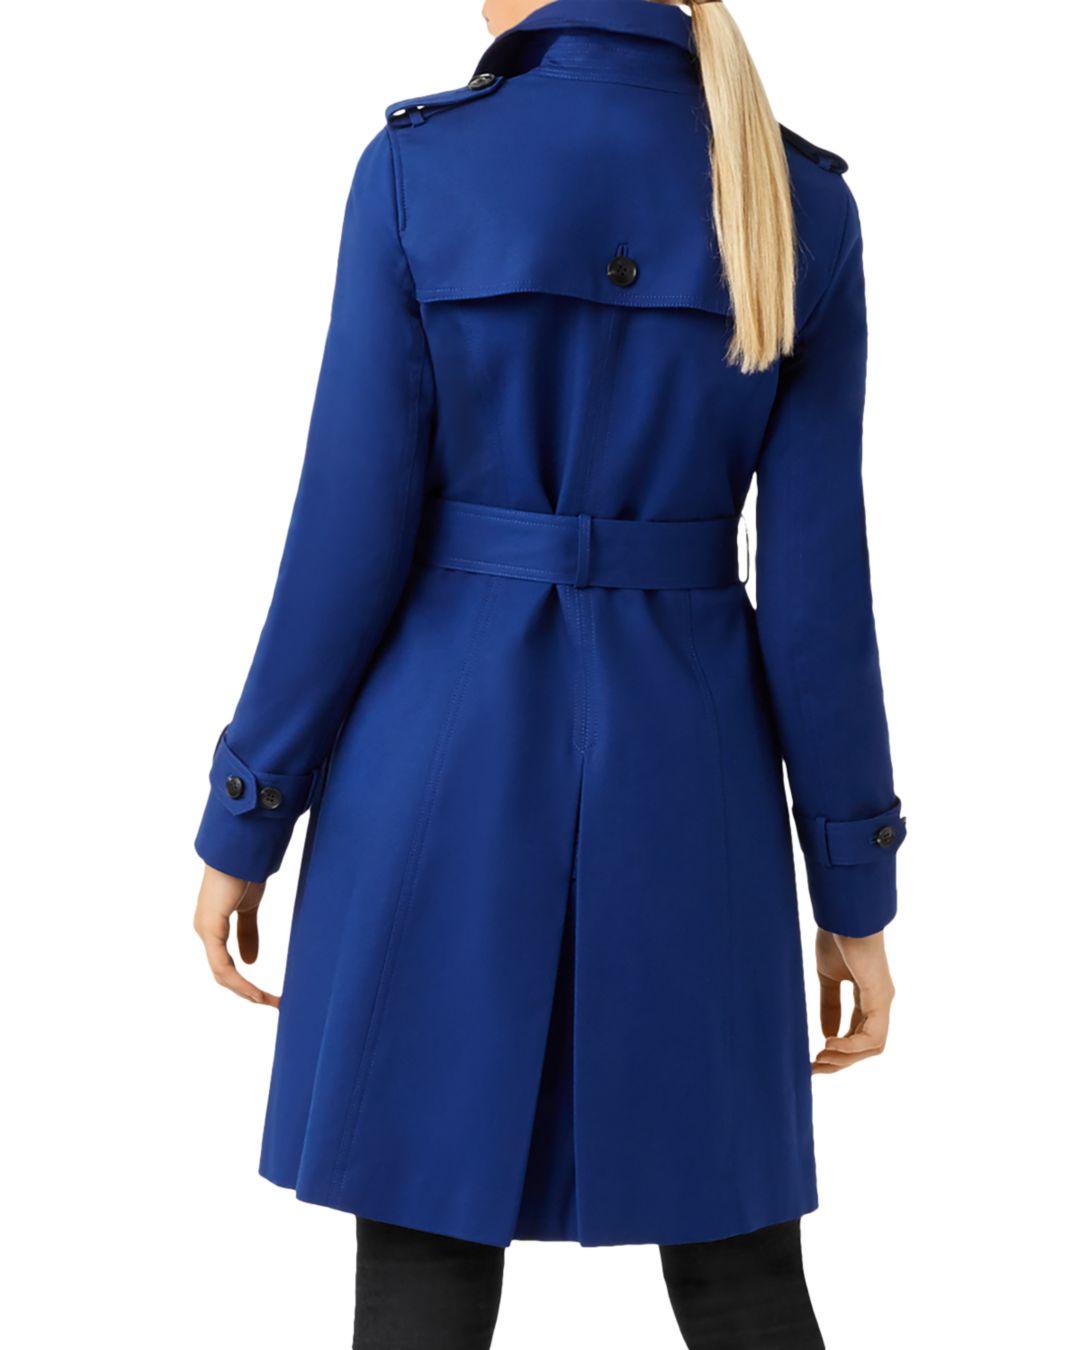 Hobbs Cotton London Saskia Trench Coat in French Blue (Blue) - Save 70% ...